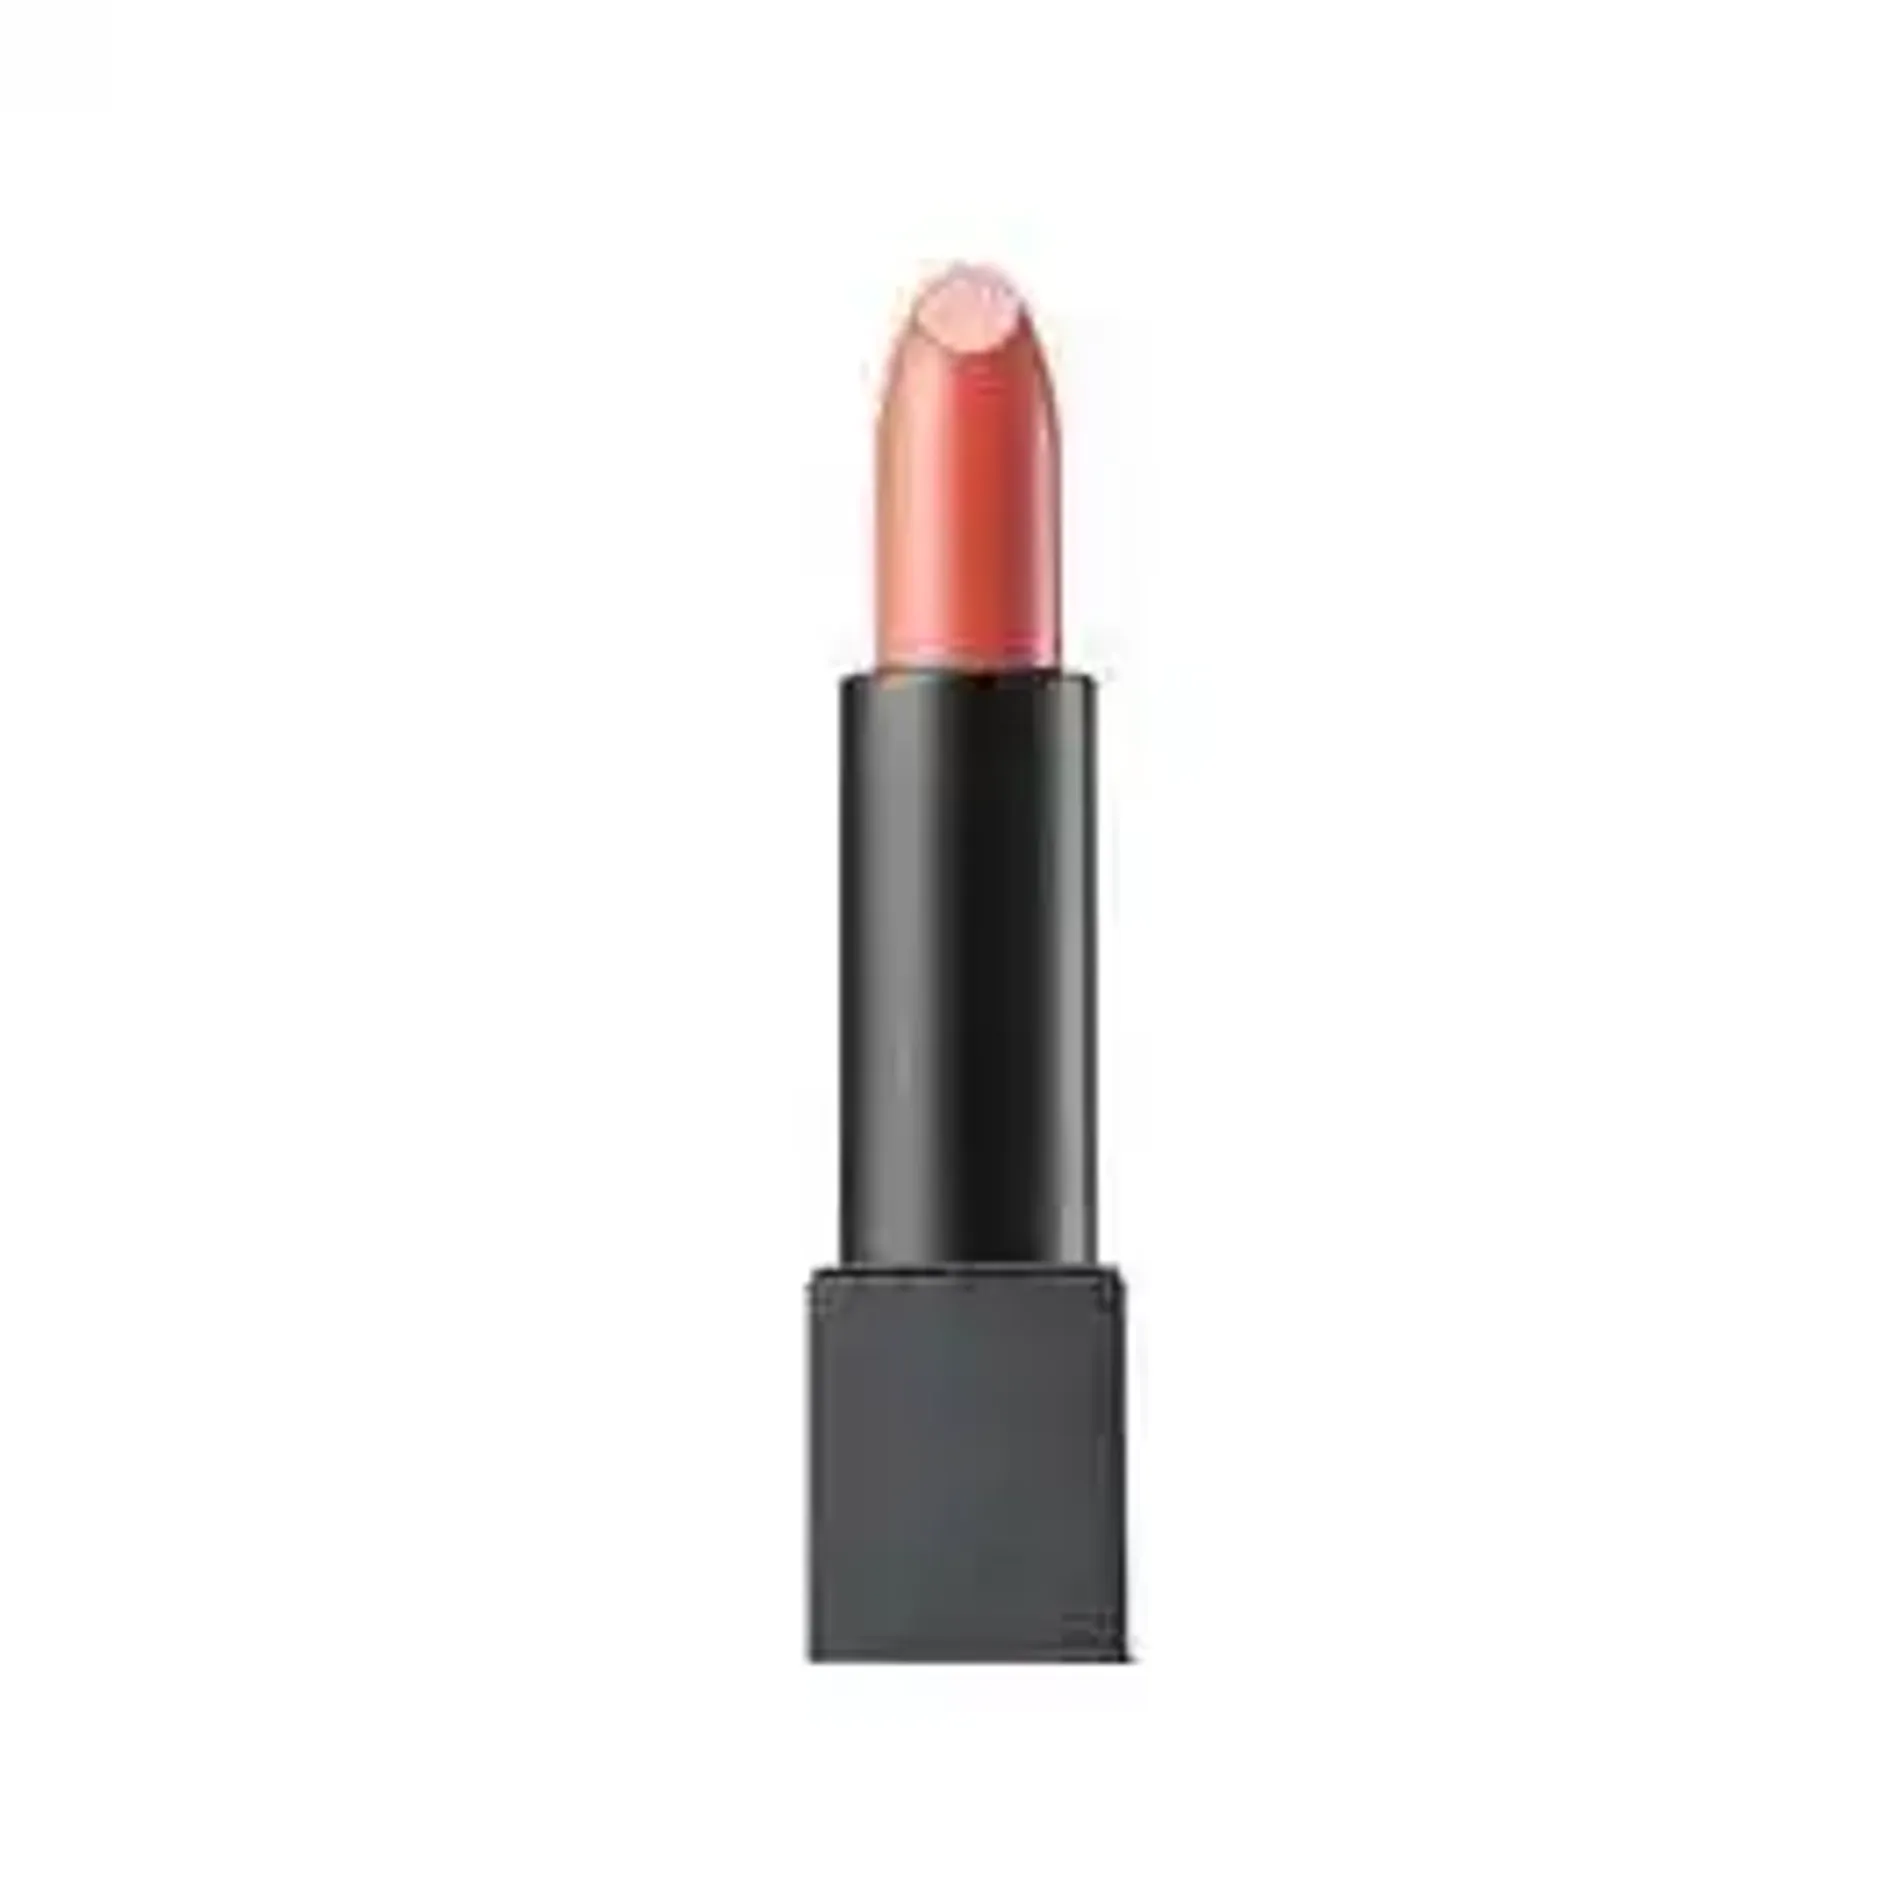 son-thoi-giverny-slip-melting-louge-05-sensual-coral-3-5g-1